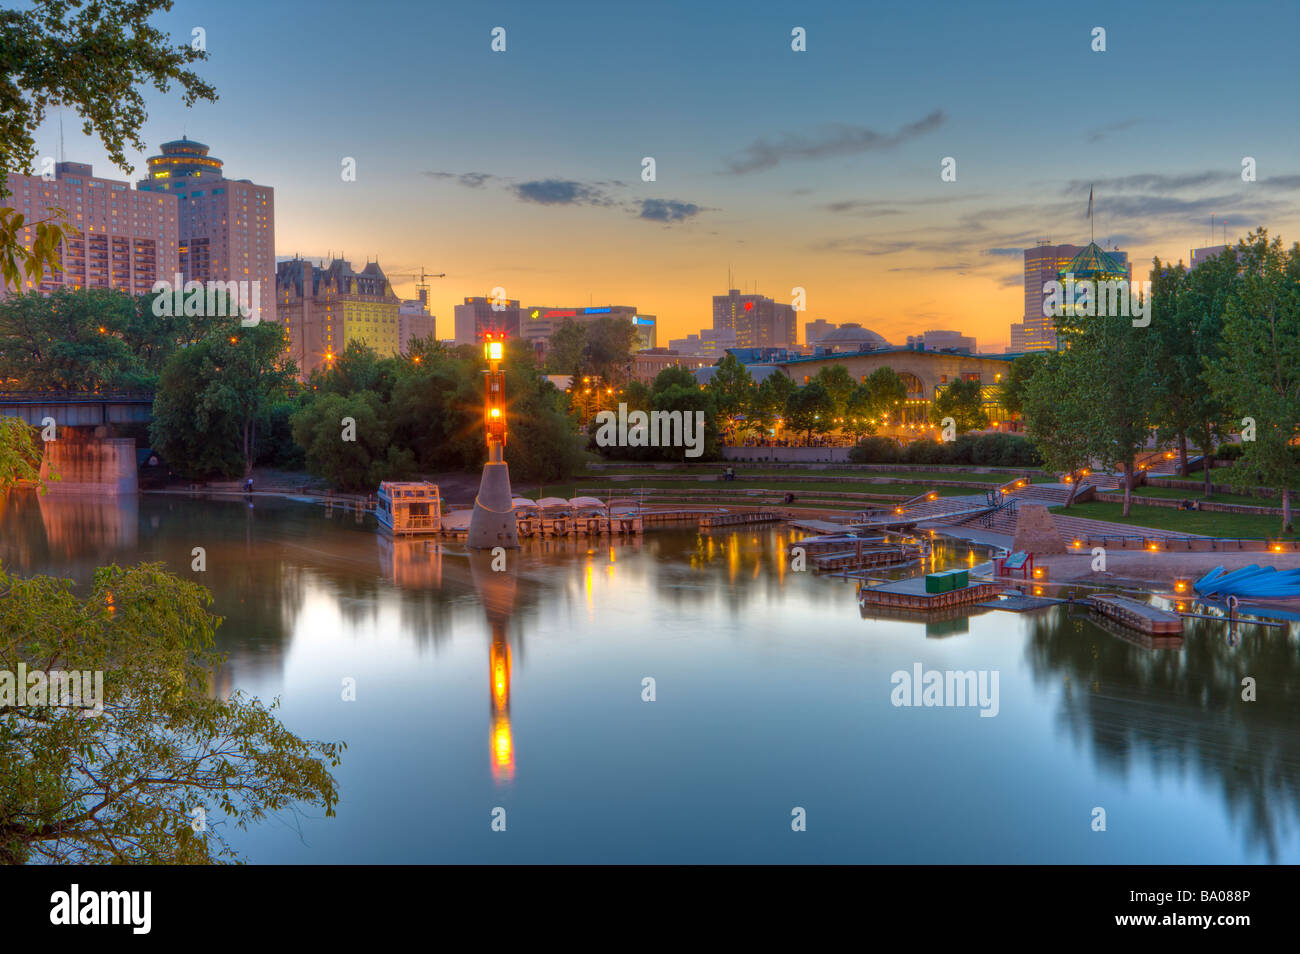 The Assiniboine River Marina and the Market and Tower at The Forks,a National Historic Site in the City of Winnipeg,Manitoba. Stock Photo